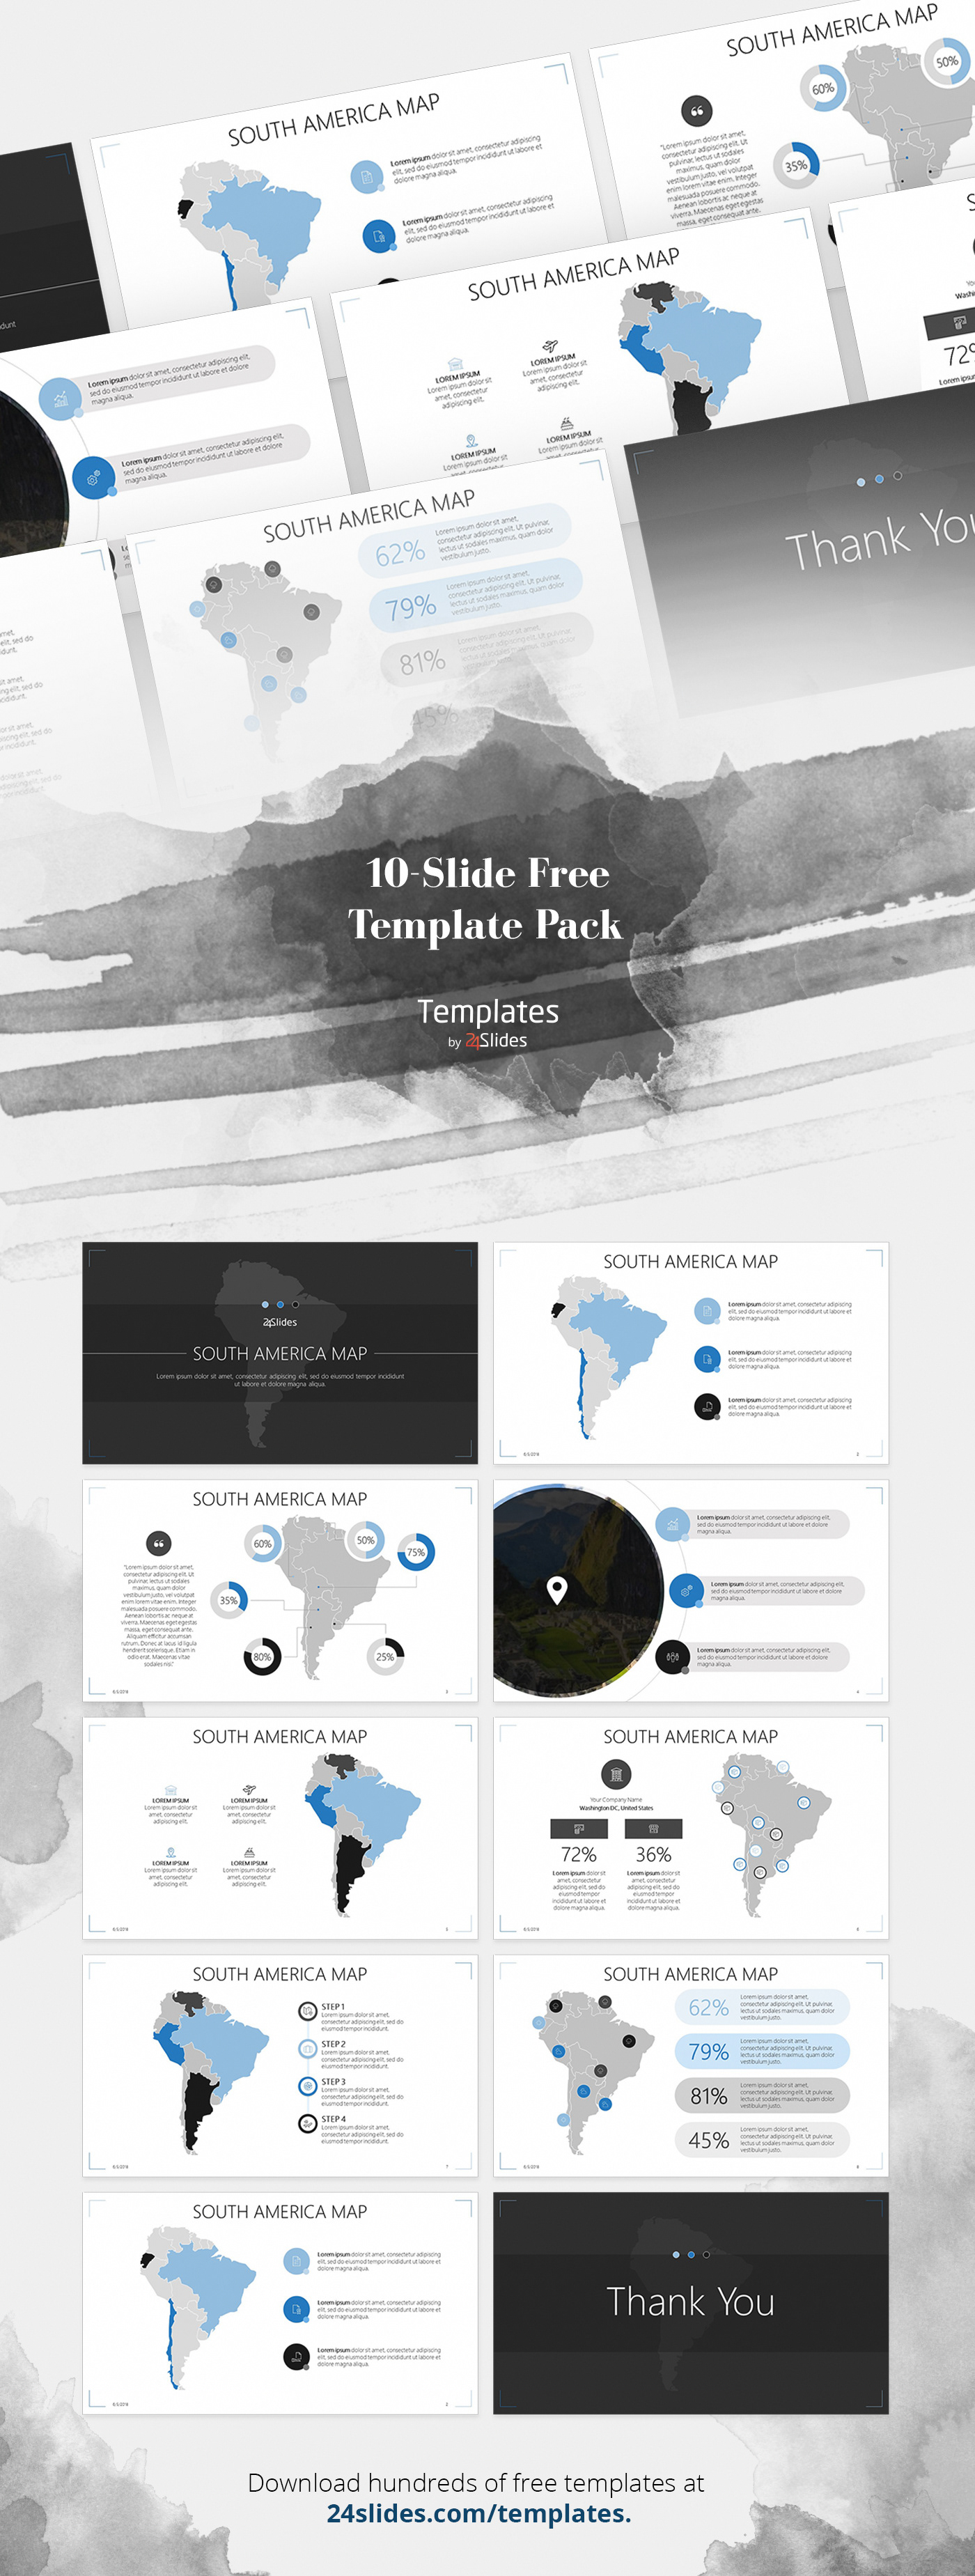 Presentation templates download Free Template Powerpoint corporate branding